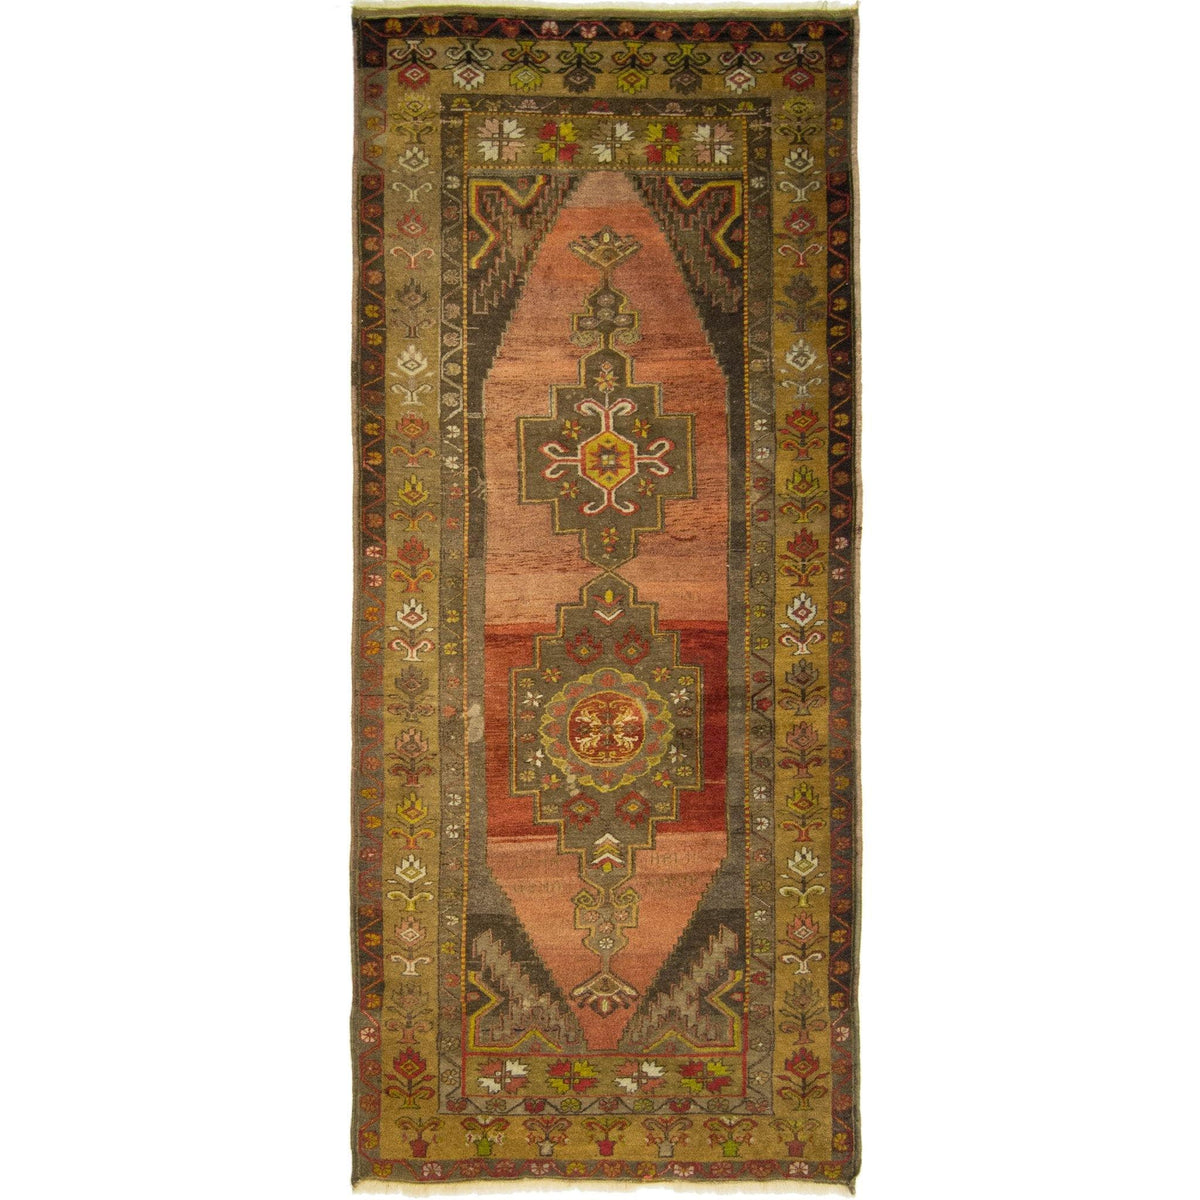 Antique Hand-knotted 100% Wool Anatolian Turkish Runner 115cm x 260cm (SIGNED)